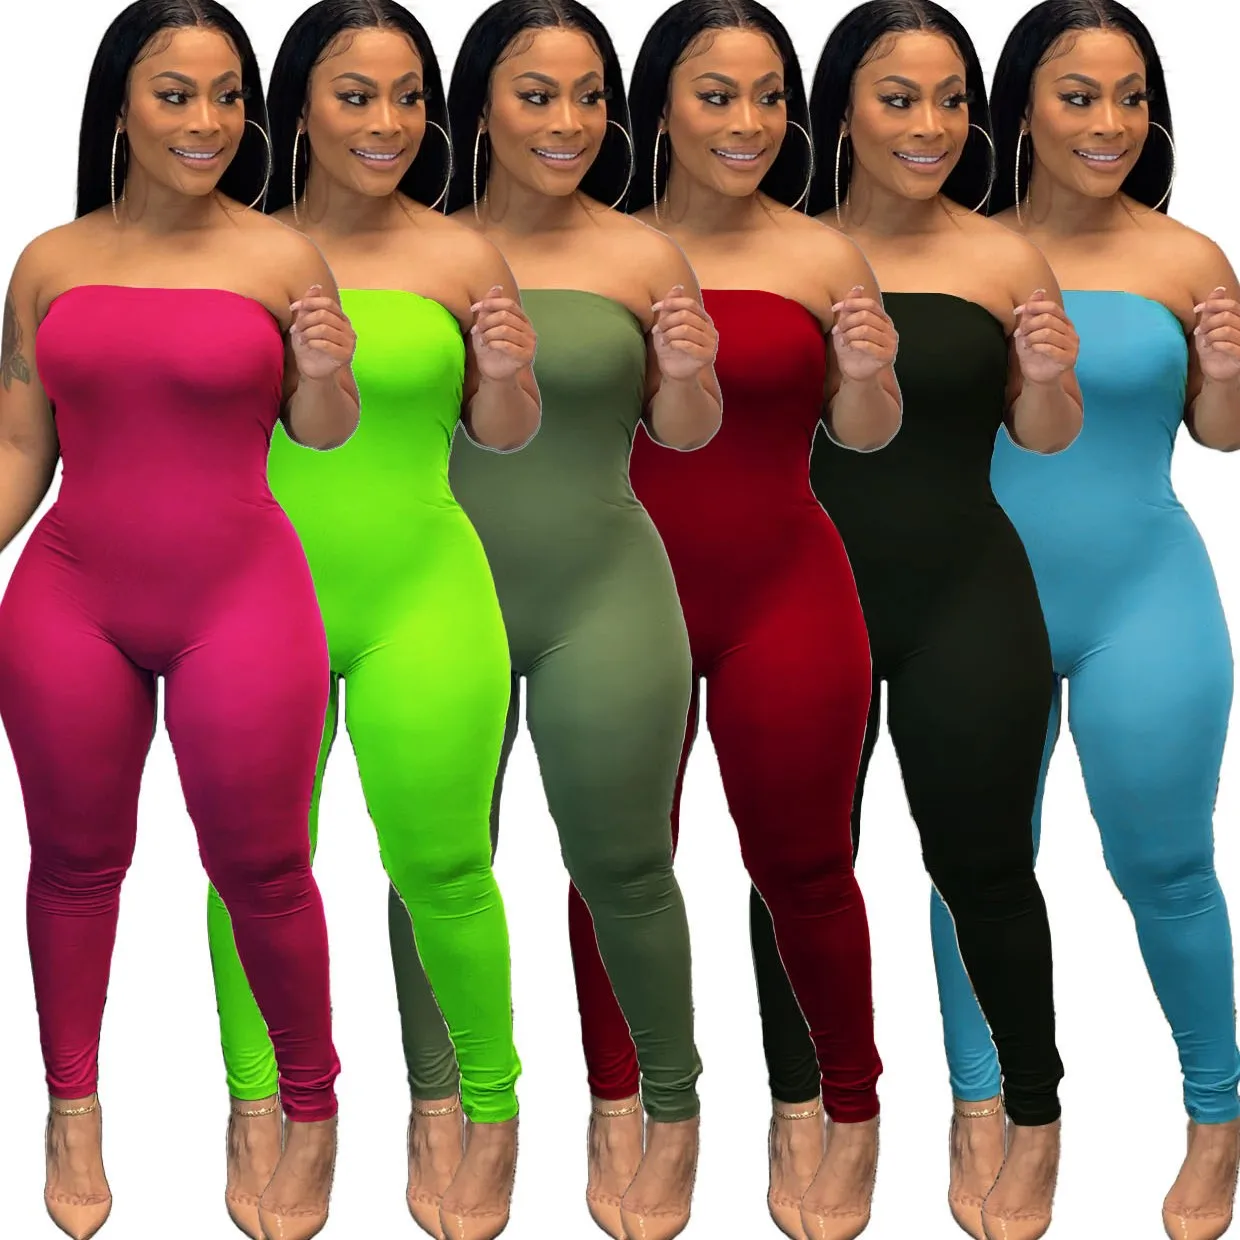 

X02541S New Stretchy Bodycon Rompers Womens Jumpsuit Sleeveless Fashion Spring Streetwear 2021 Jumpsuits One Piece Clothing, Blue/black/red/army green/rose red/fluorescent green